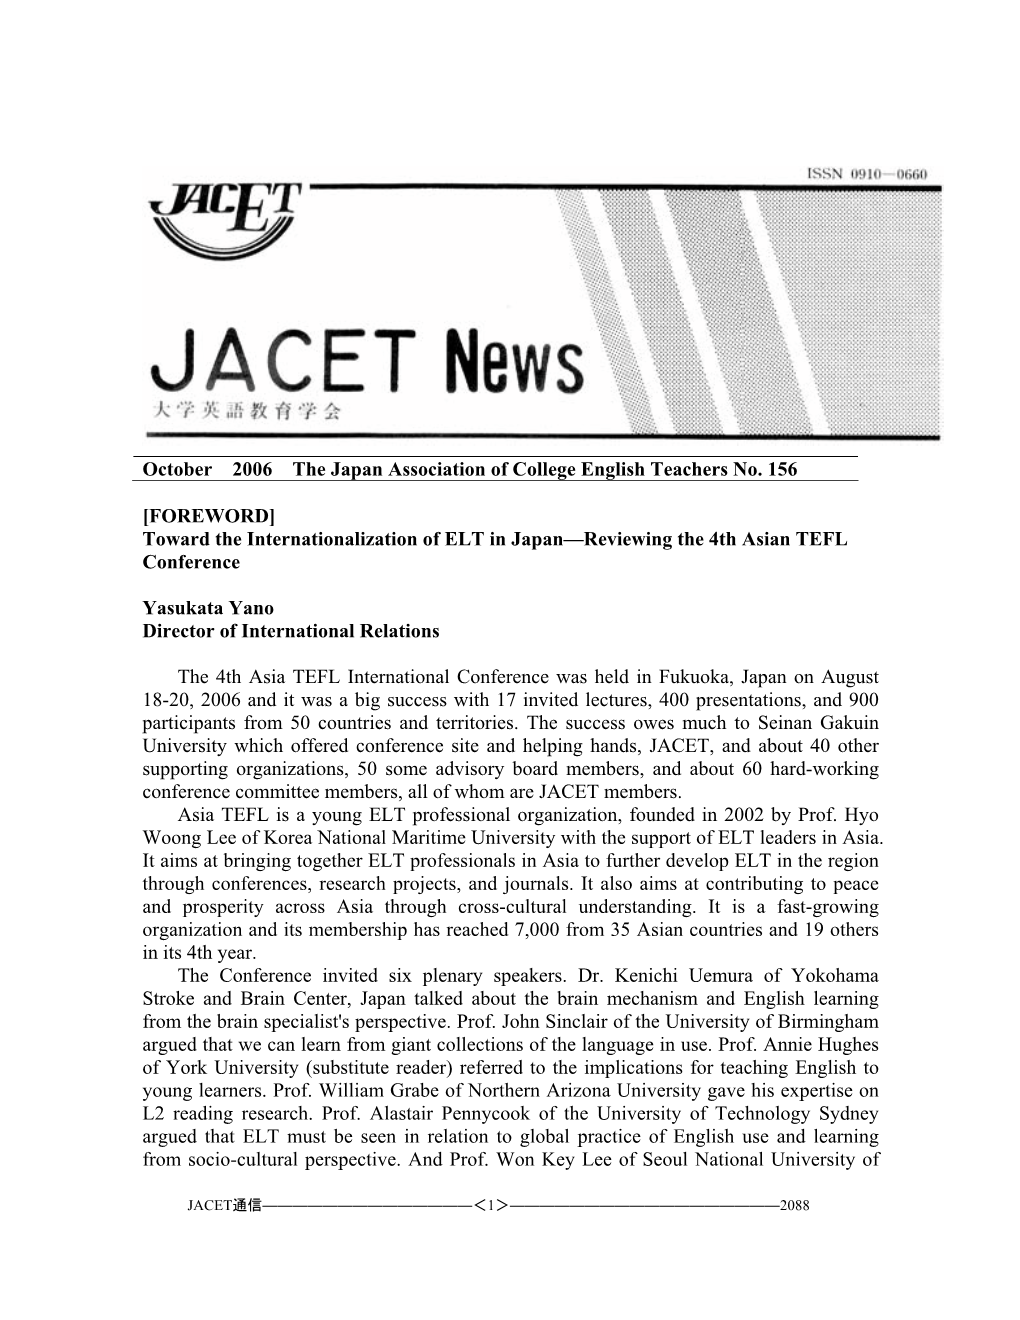 JACET Newsletter, Seminar, Networking, International, JACET-Sigs Support, and JACET Prize Committees